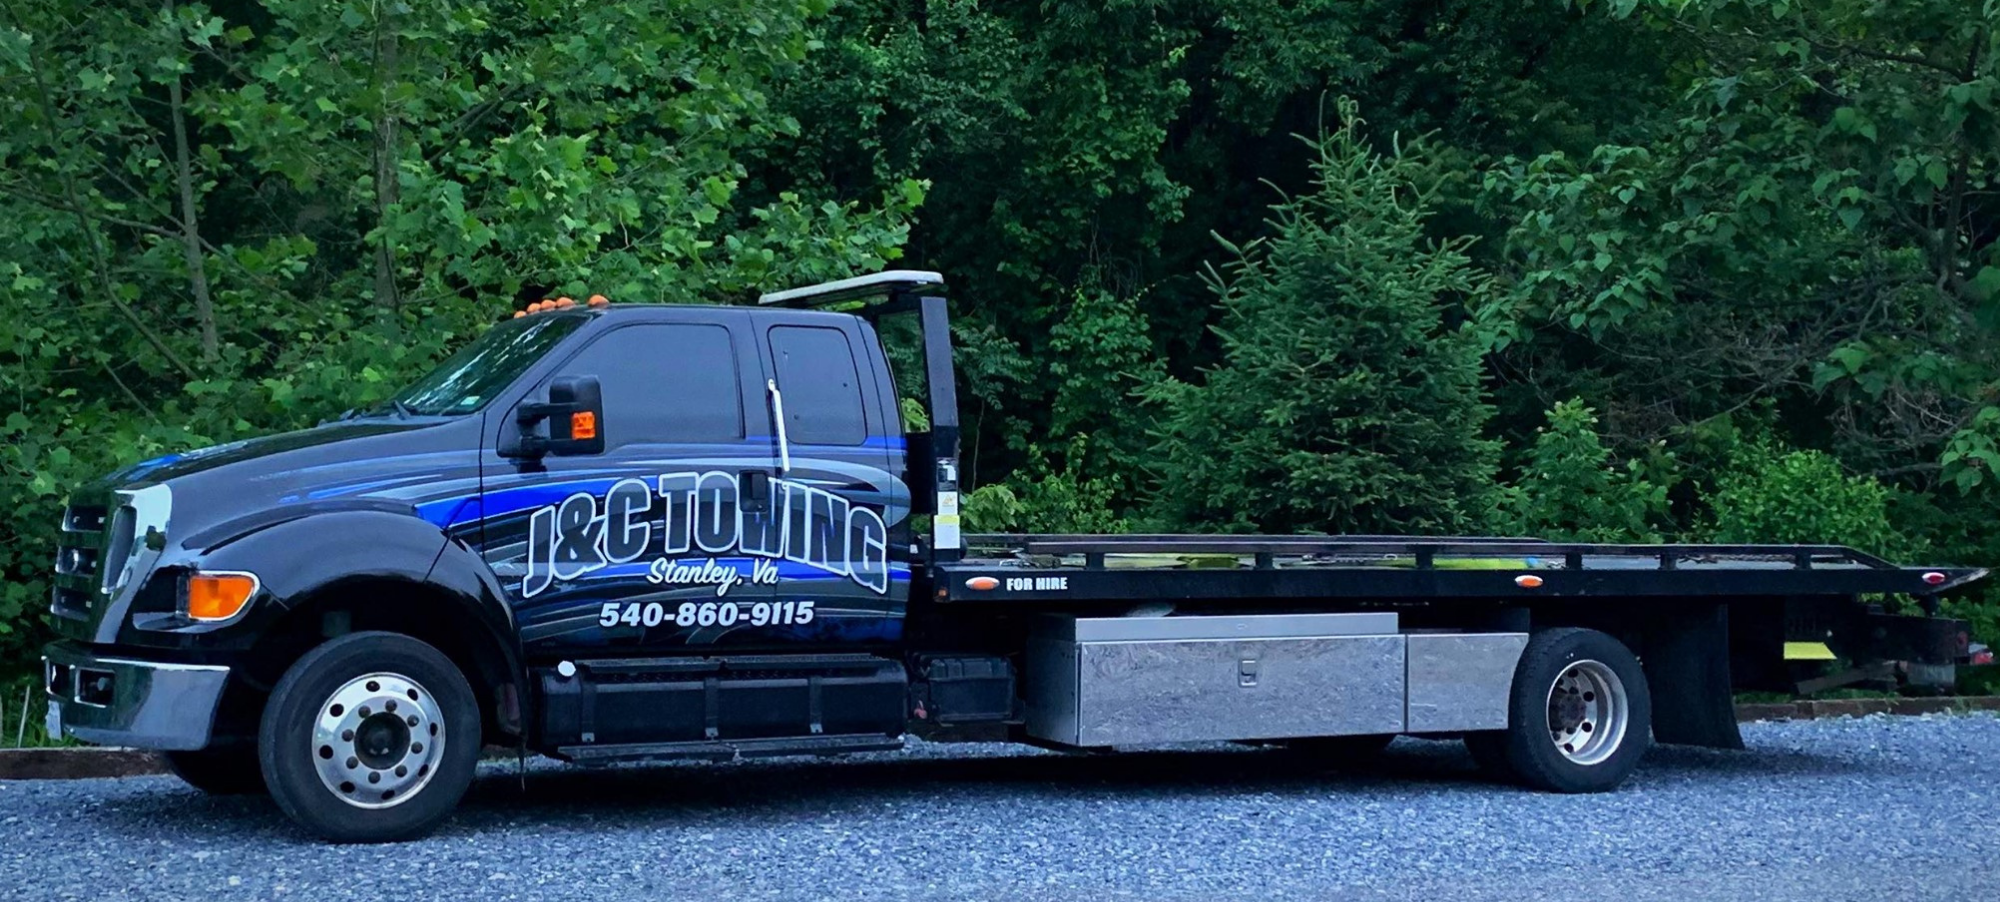 J & C Towing tow truck